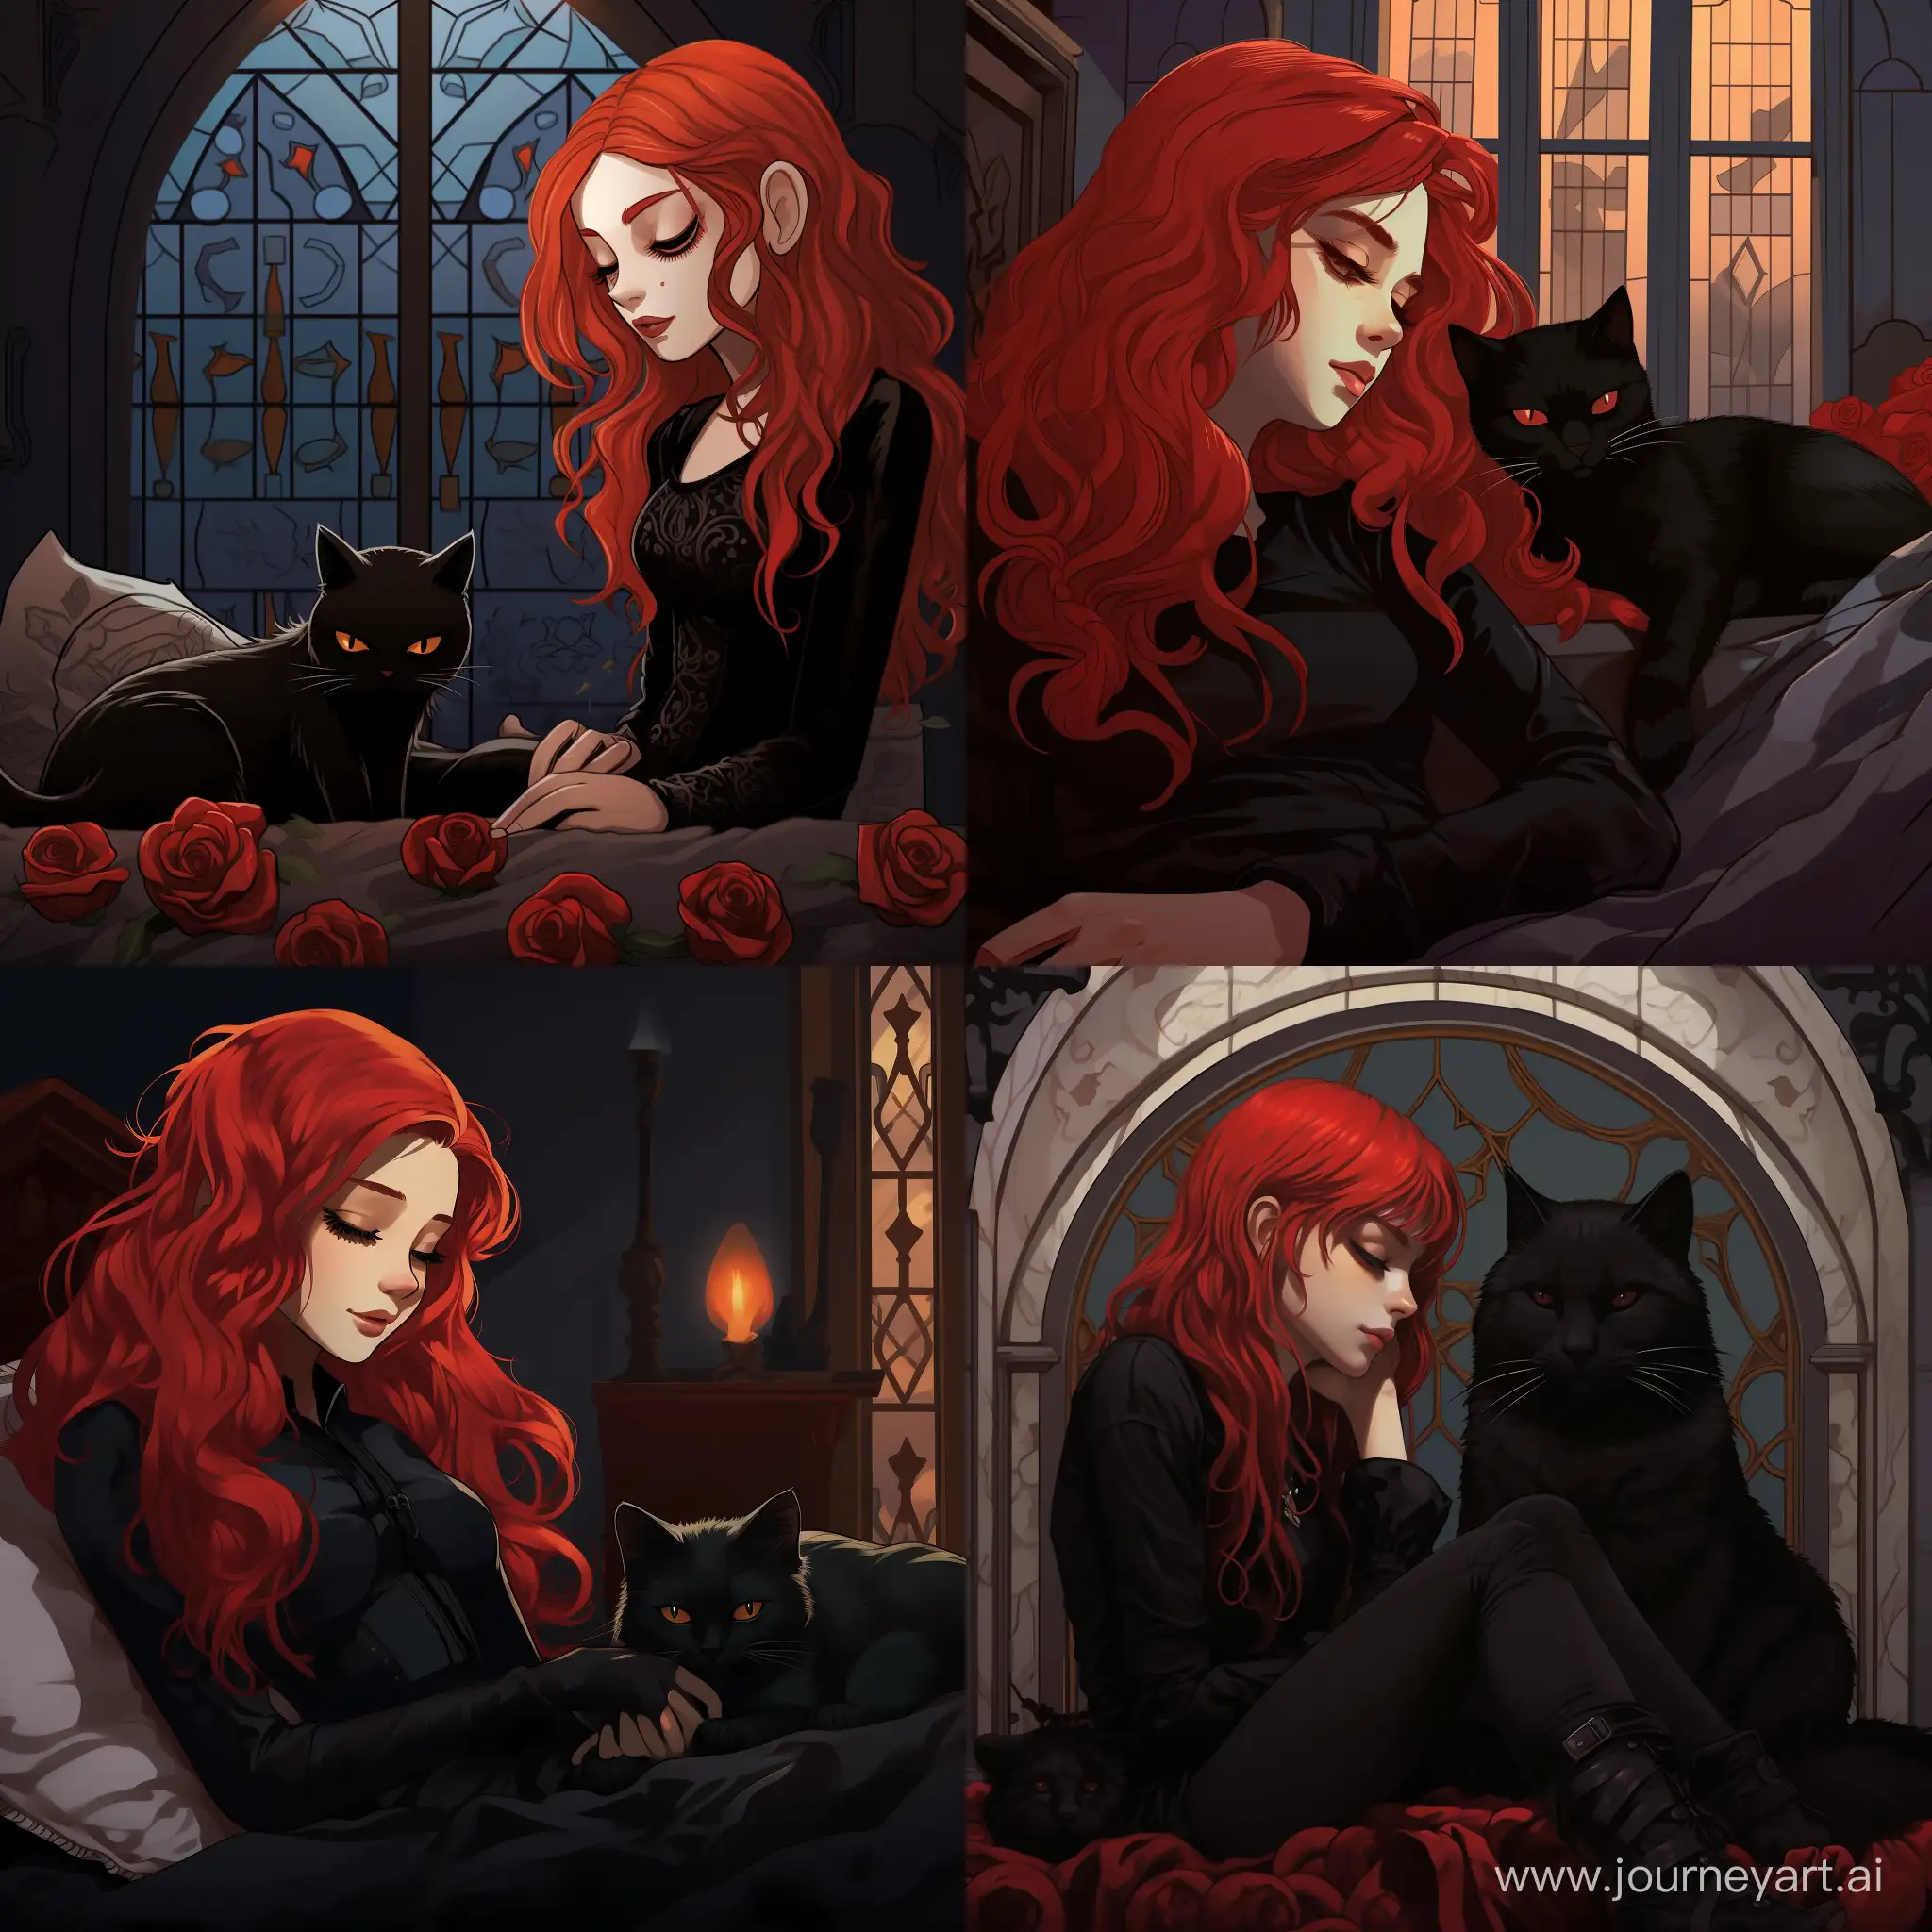 A girl with red hair in a black Gothic dress sleeps on a bed next to a Gothic-style cat